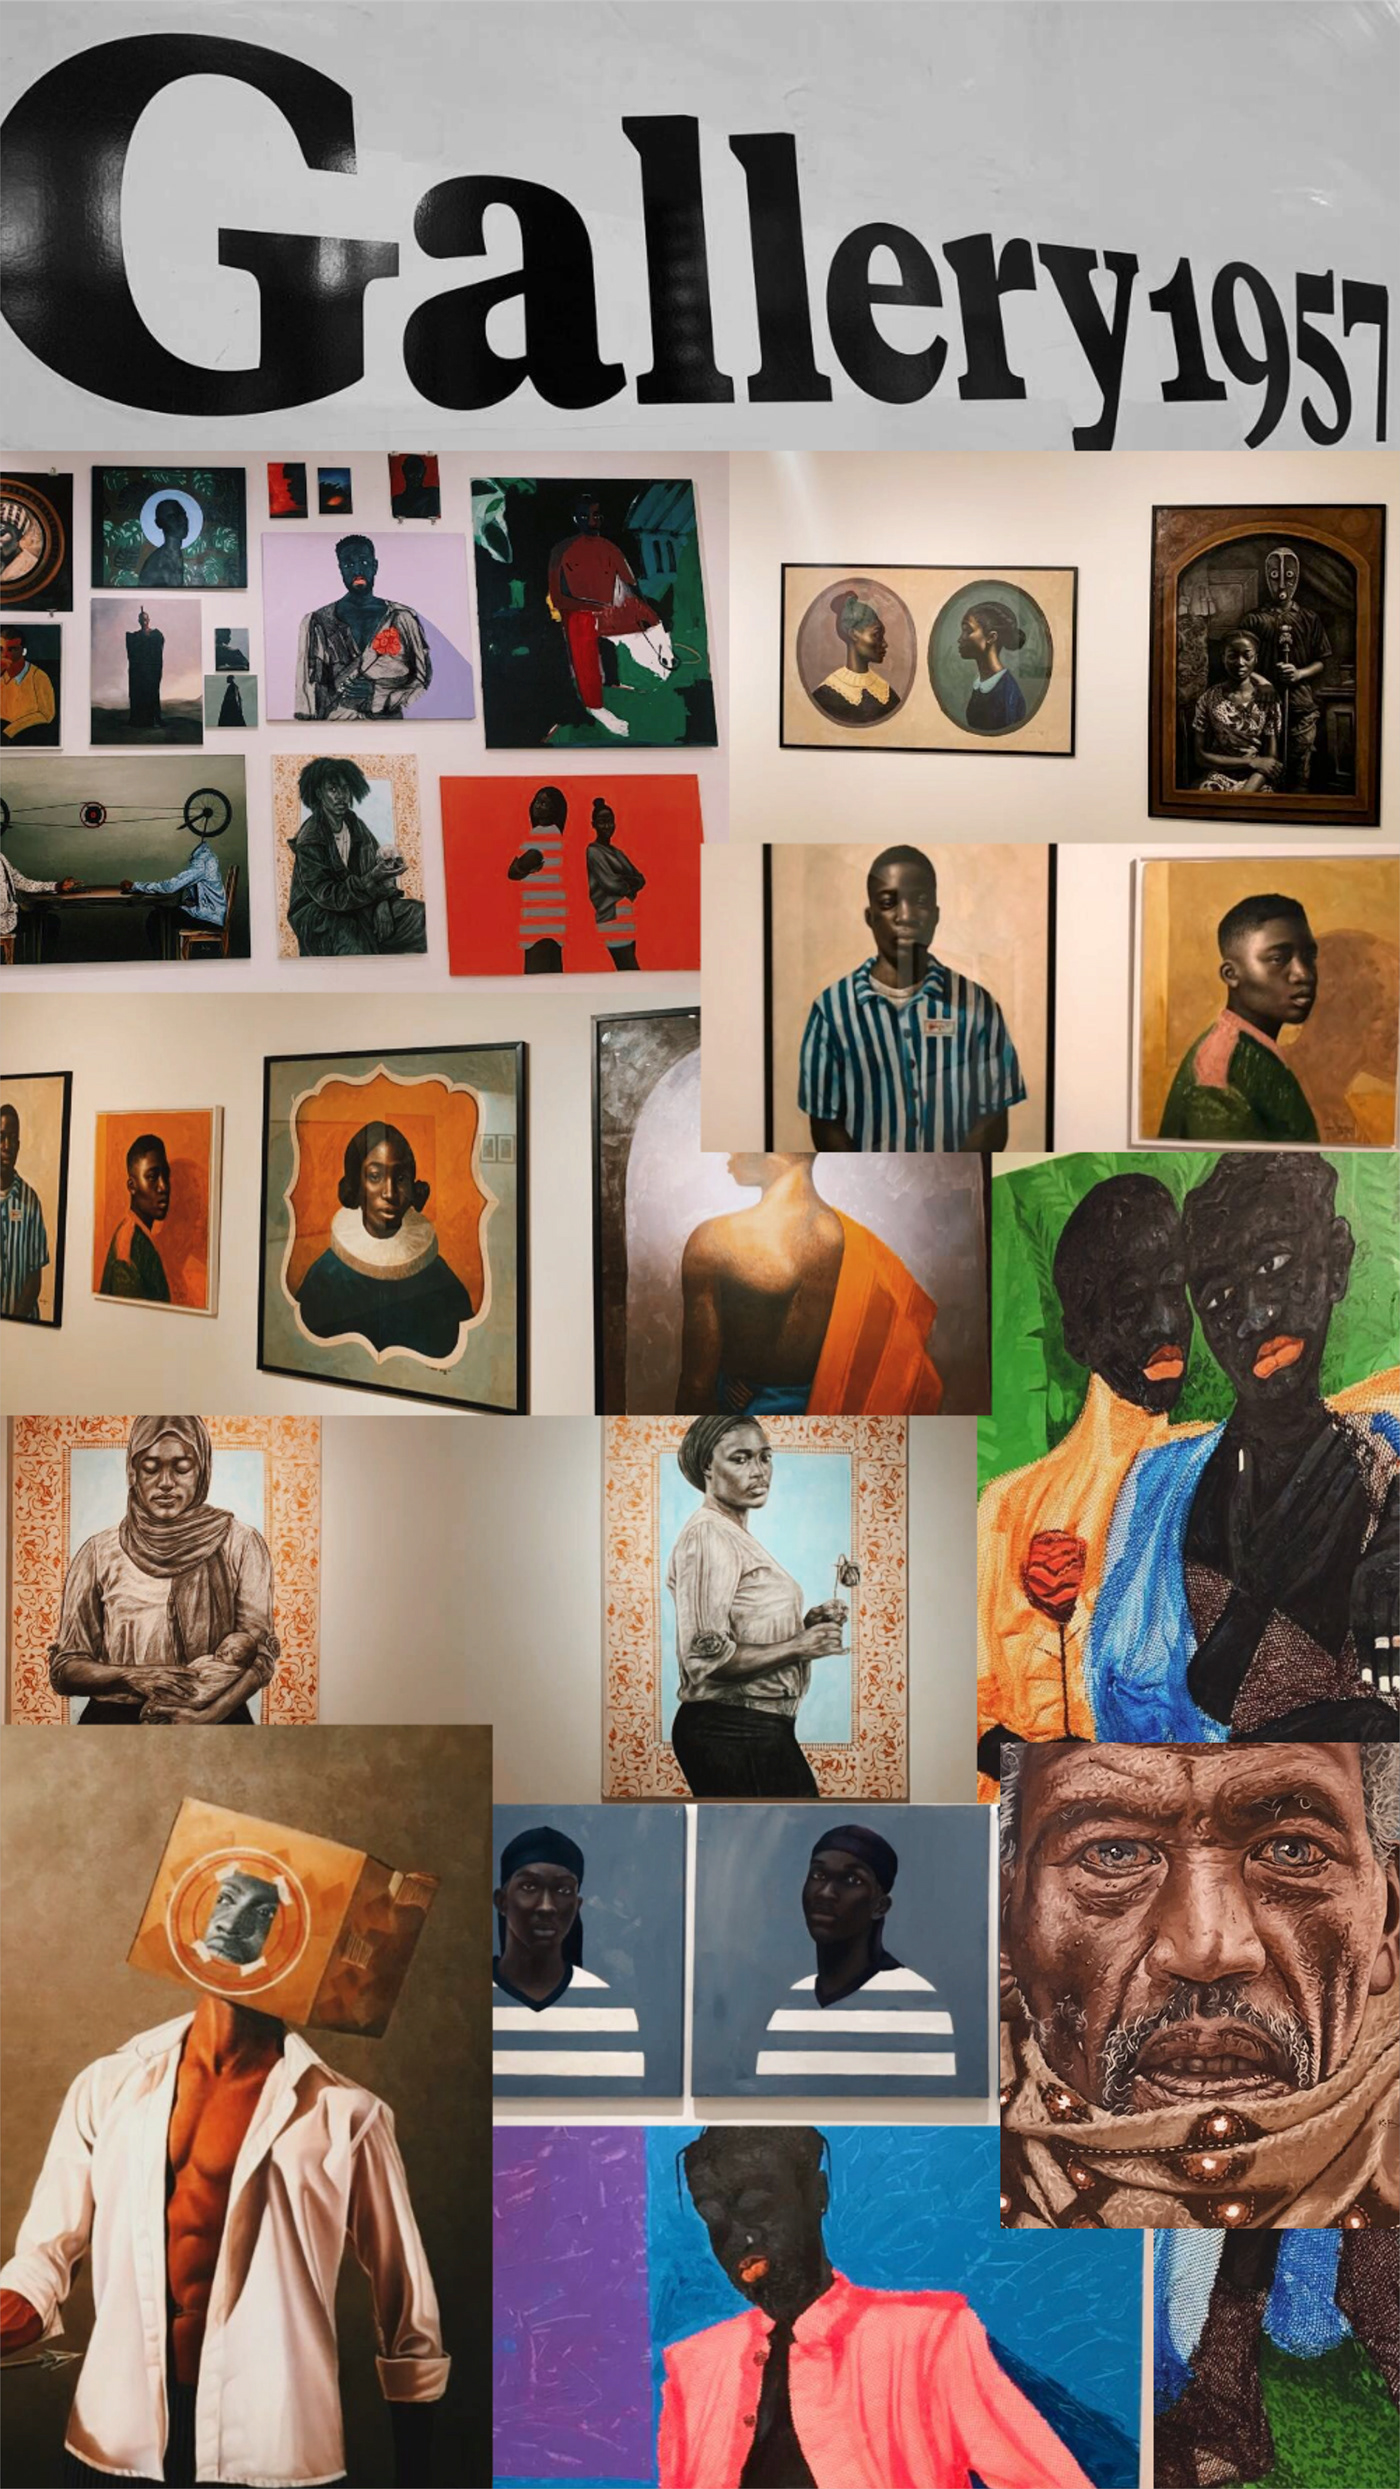 accra art Exhibition  Ghana Kempinski contemporary art gallery exhibition ideas painting   vsco Art Gallery  Drawing  africa collage artwork culture